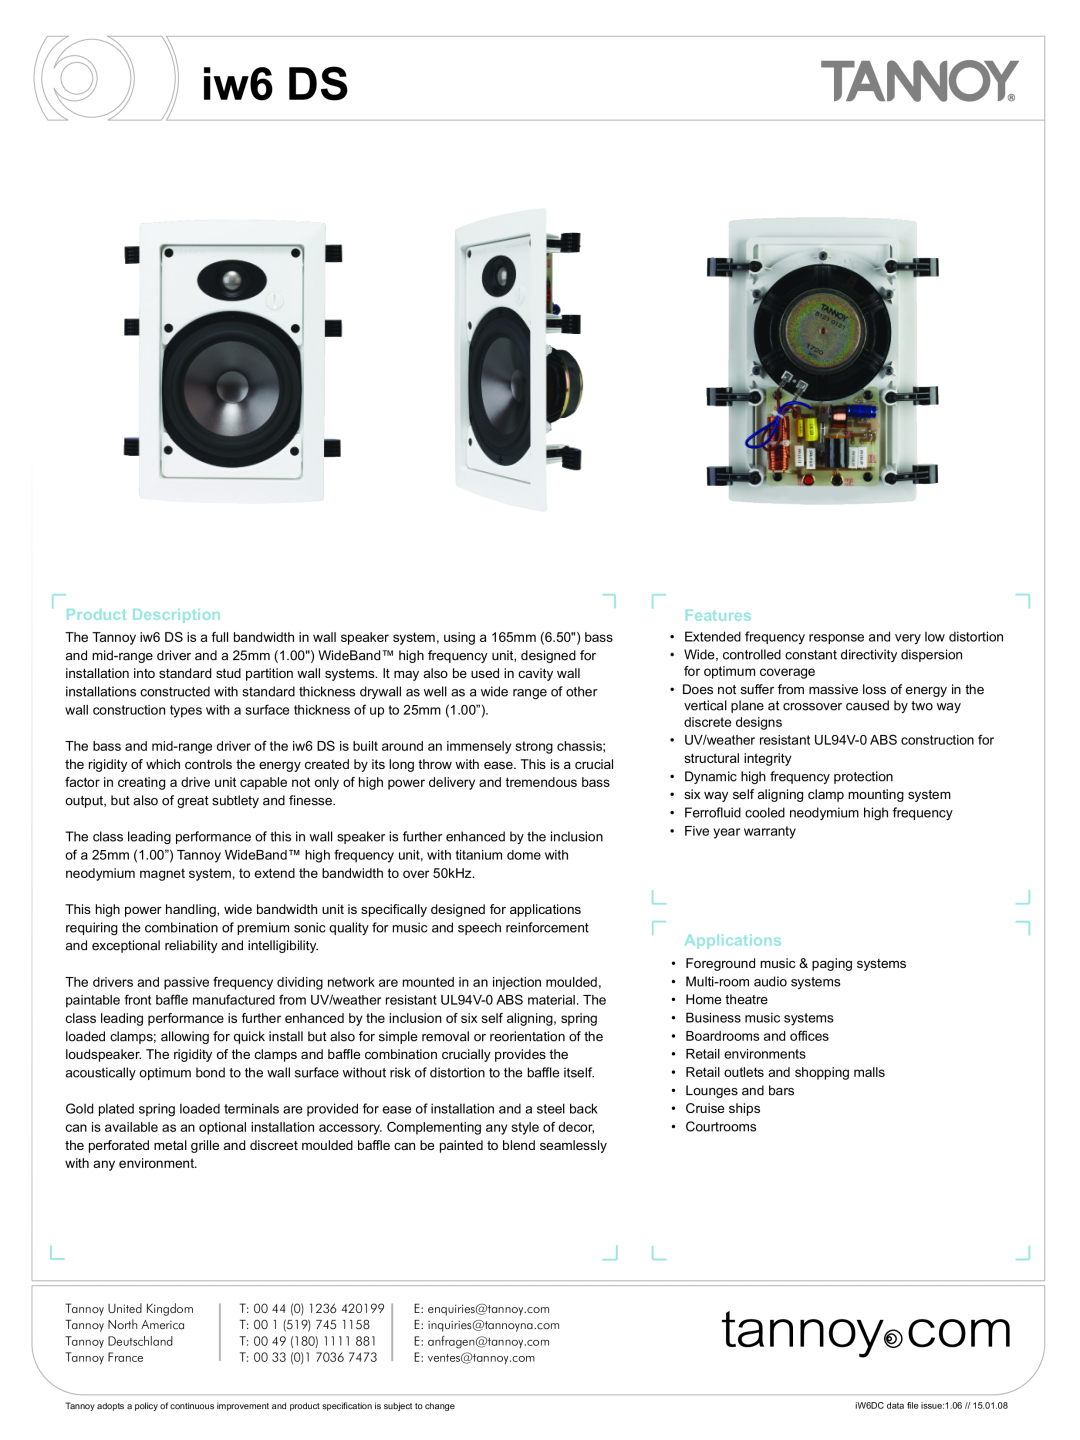 Tannoy iw6 DS warranty Features, Applications 